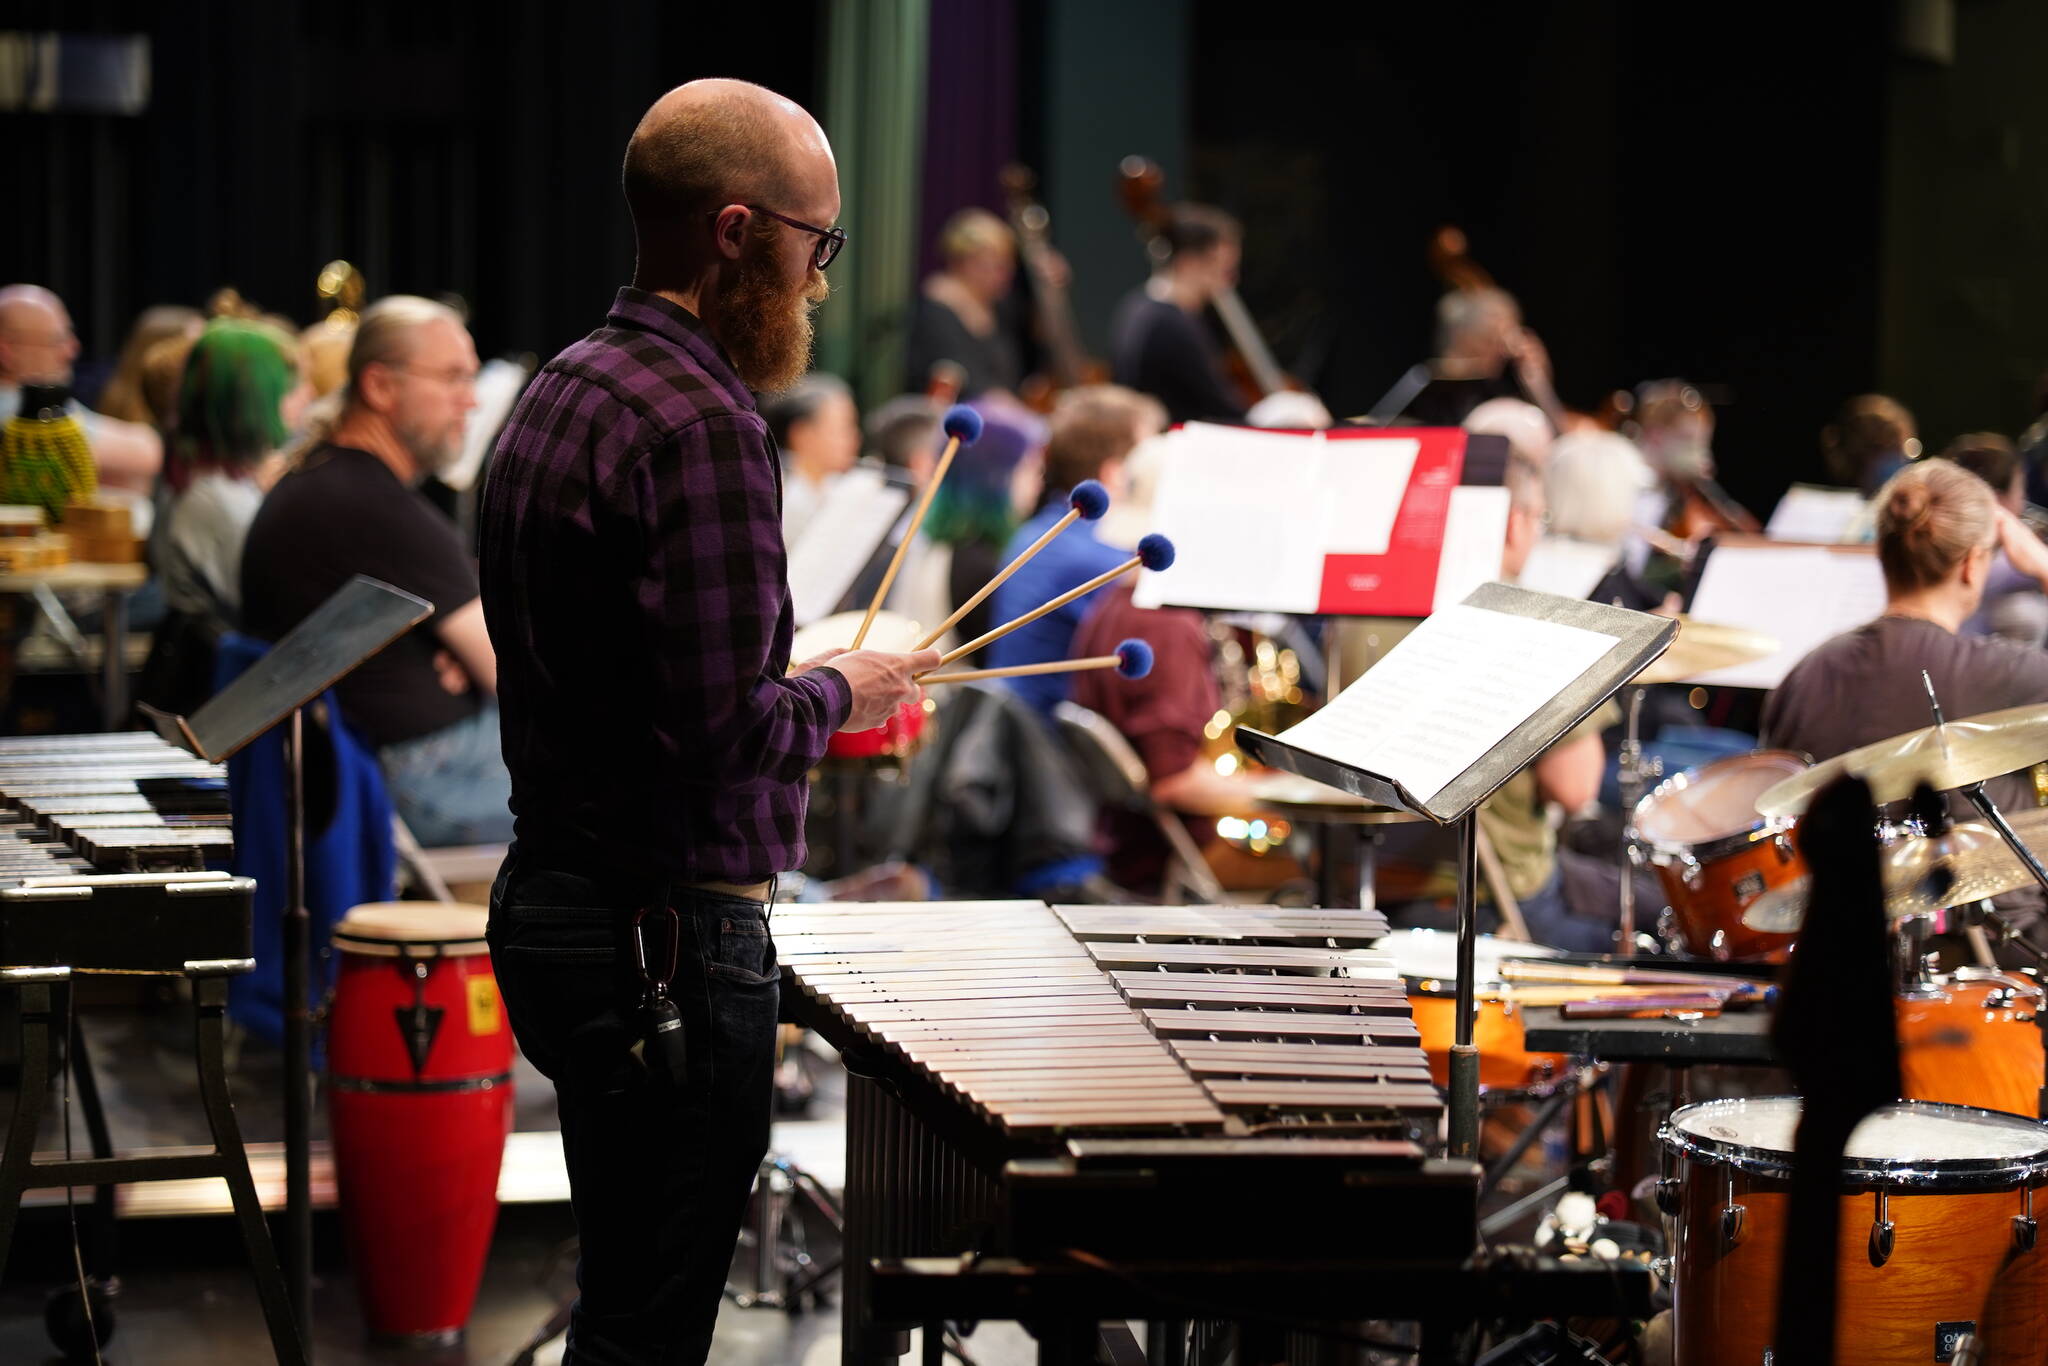 Brandon Nelson plays percussion during a rehearsal of the Saratoga Orchestra. (Photo provided)